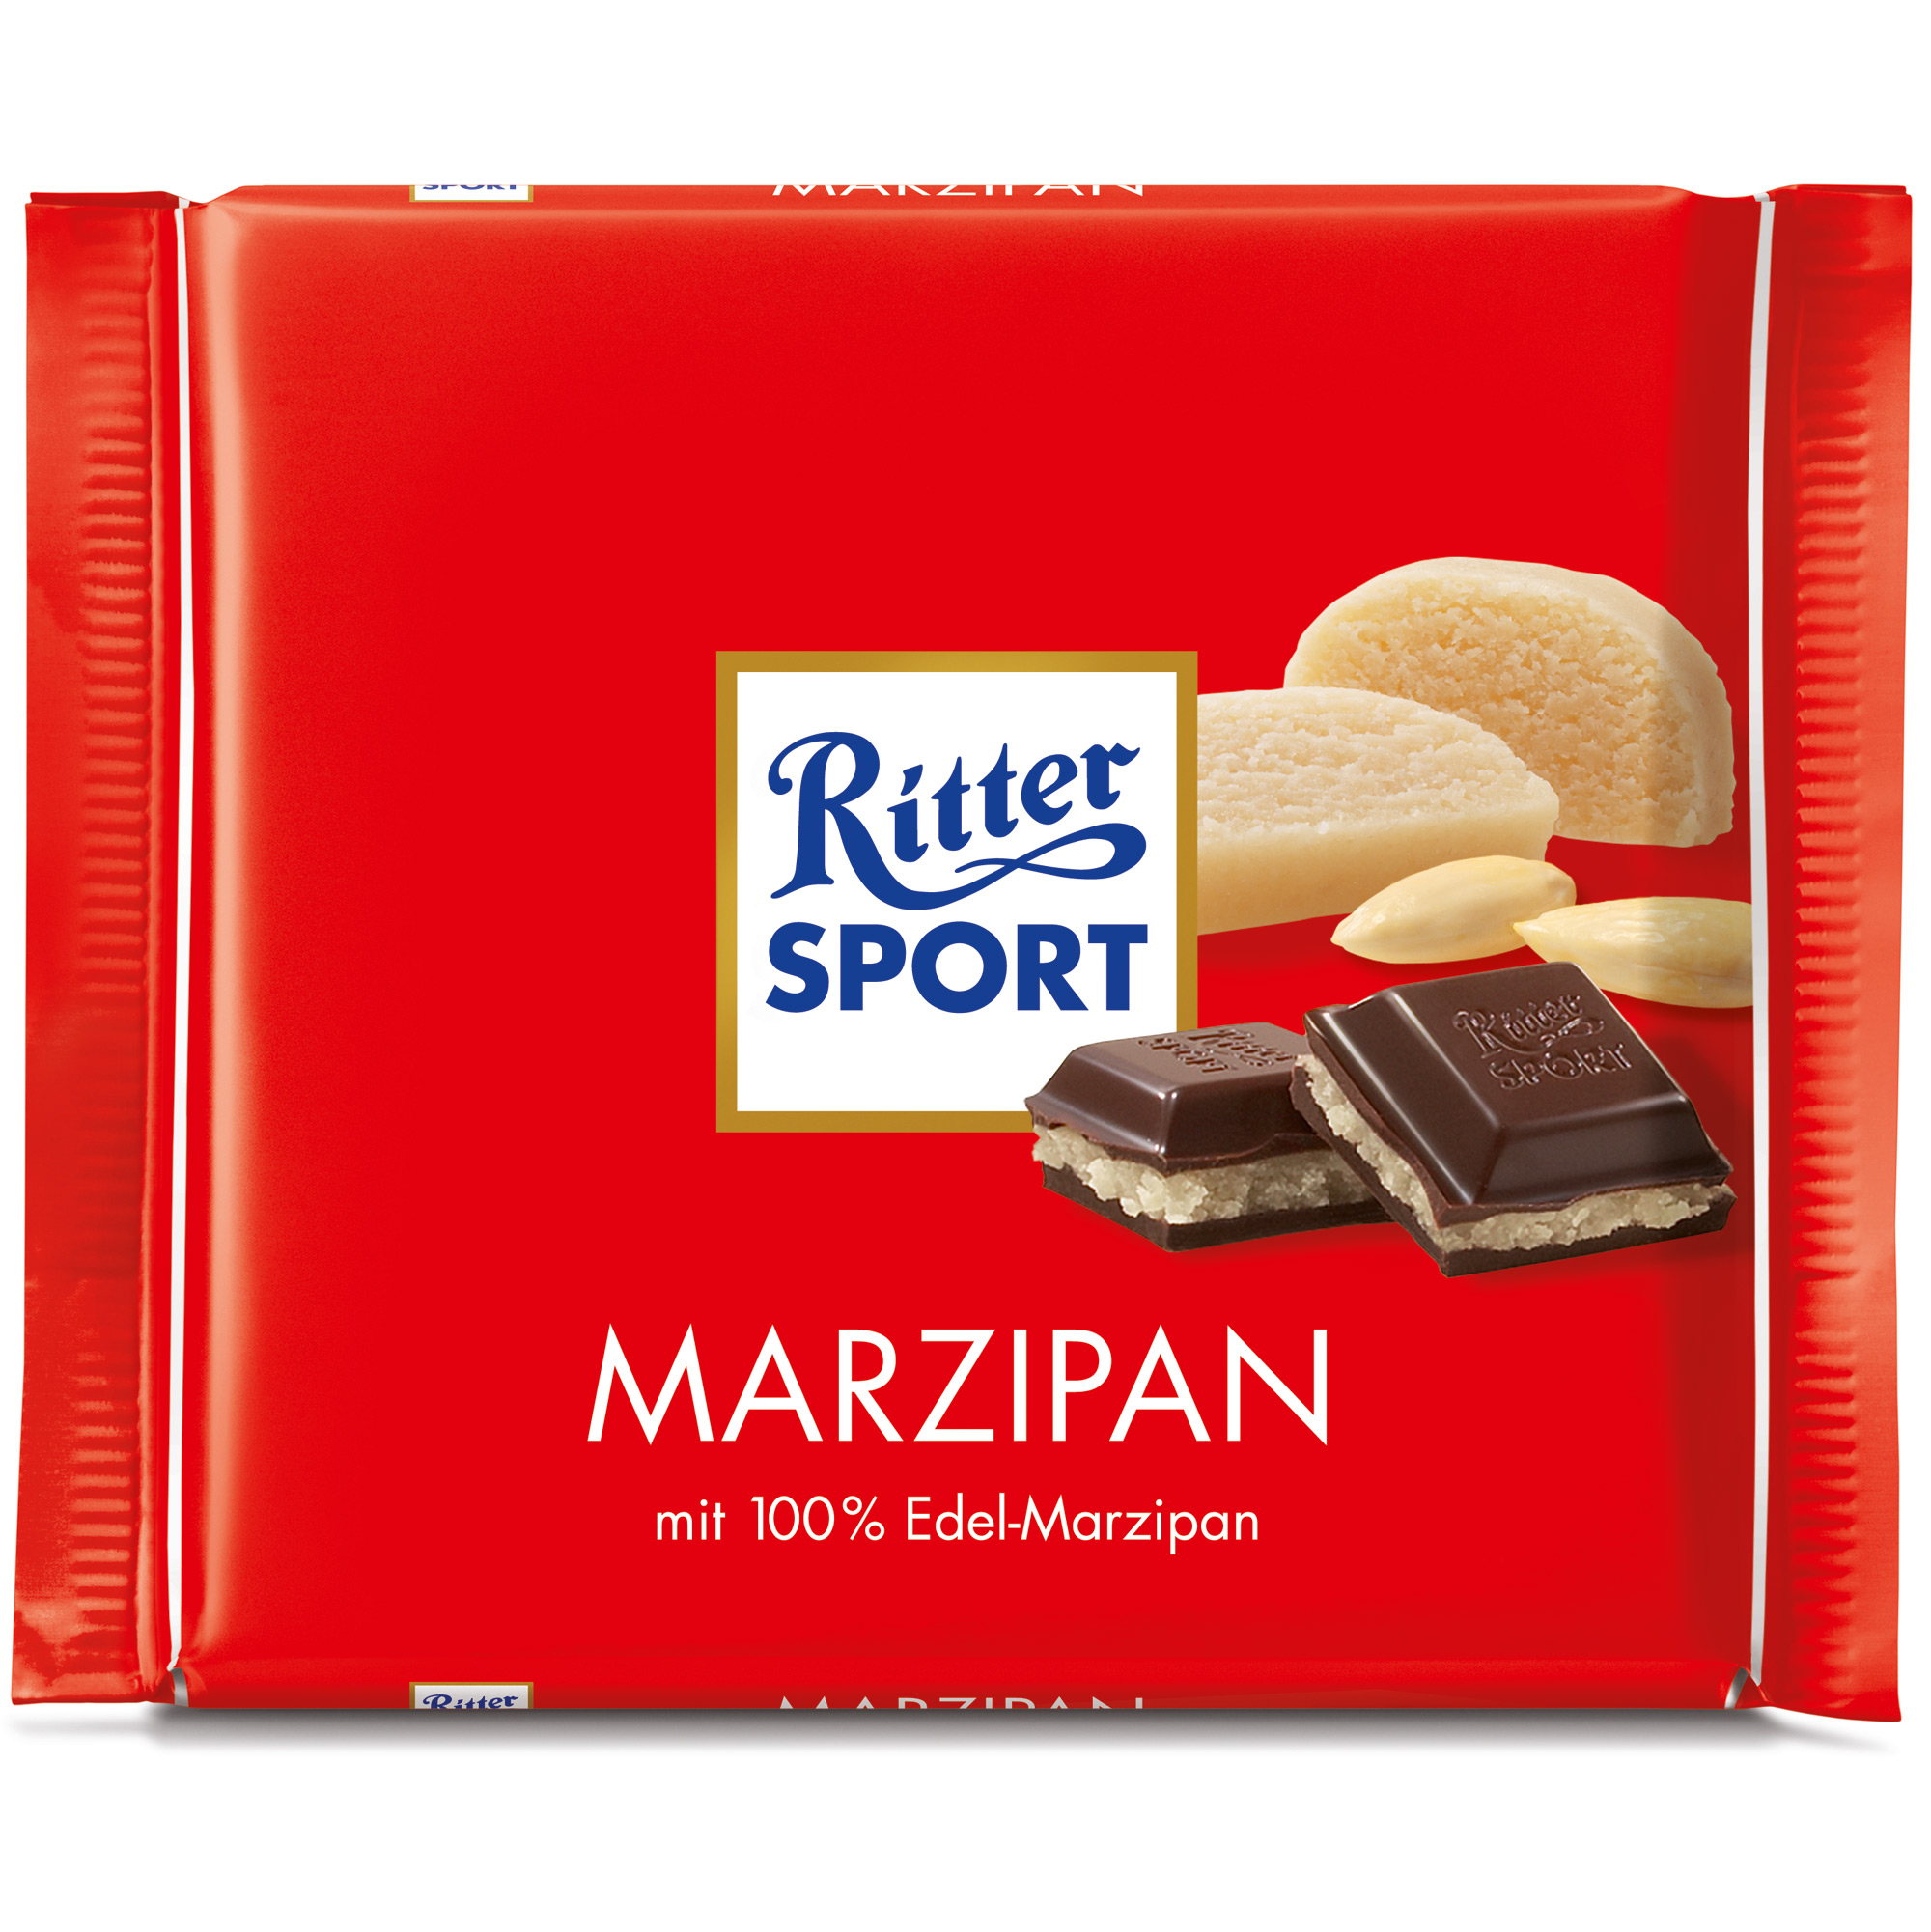 Ritter Sport launches new 100% cocao bar; can't be called chocolate in